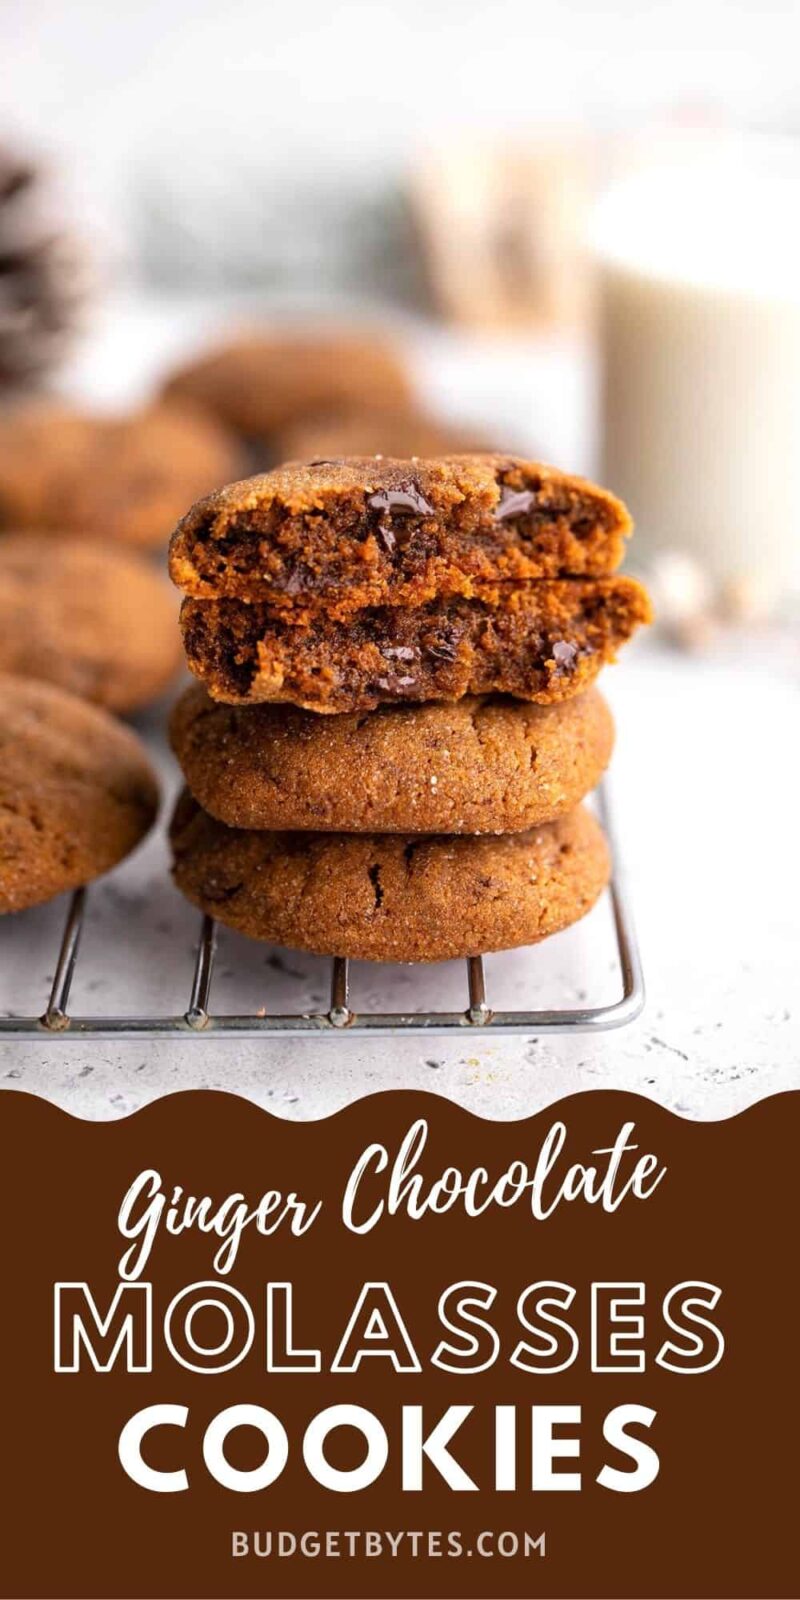 a stack of chocolate molasses cookies on a cooling rack, title text at the bottom